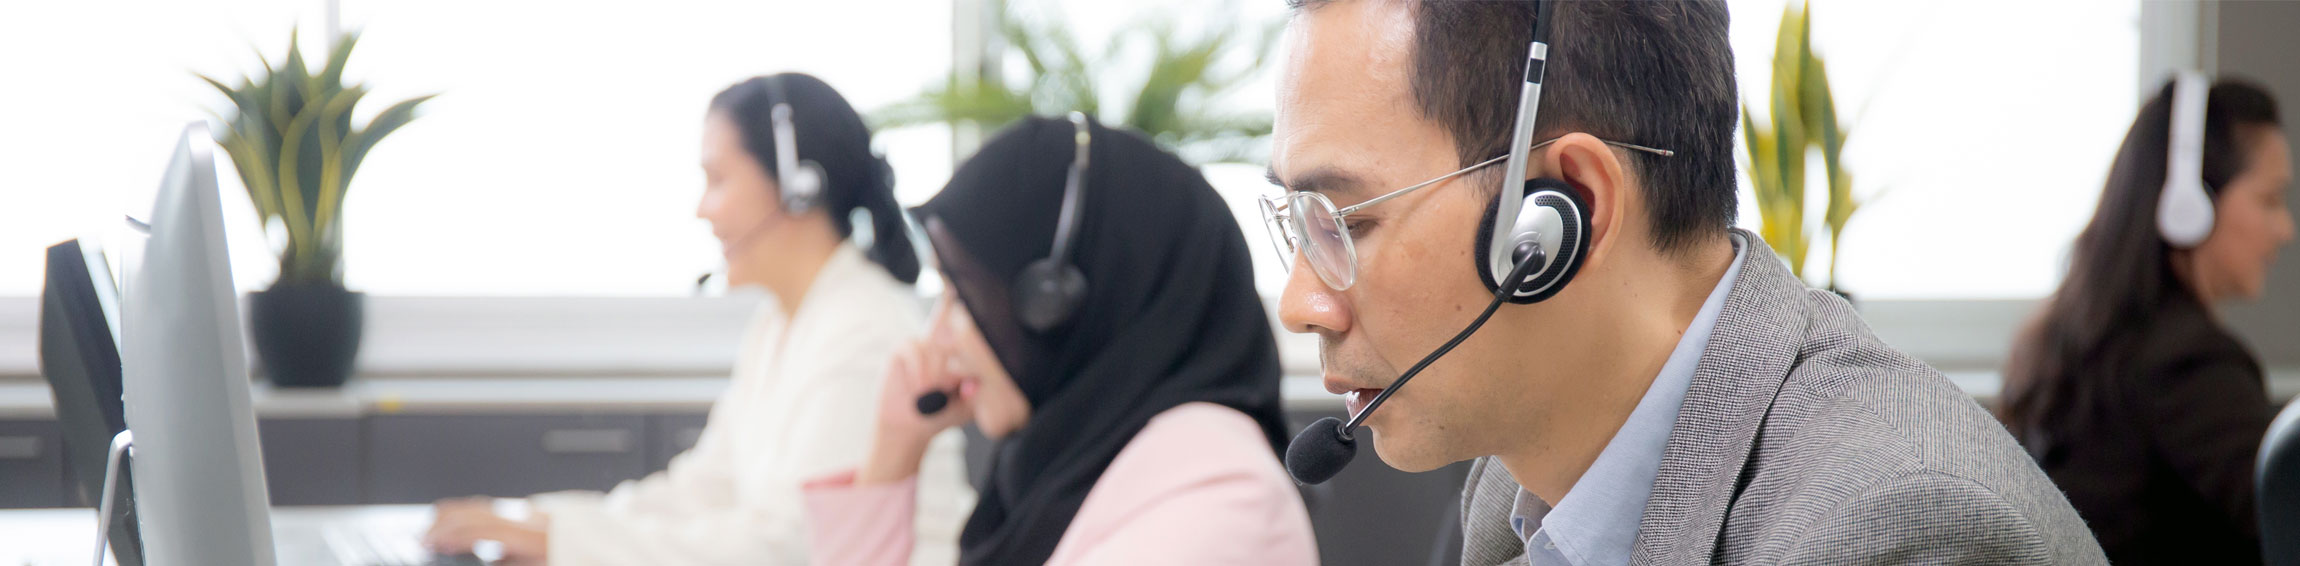 4 General Types of Skills All Contact Center Reps Must Learn